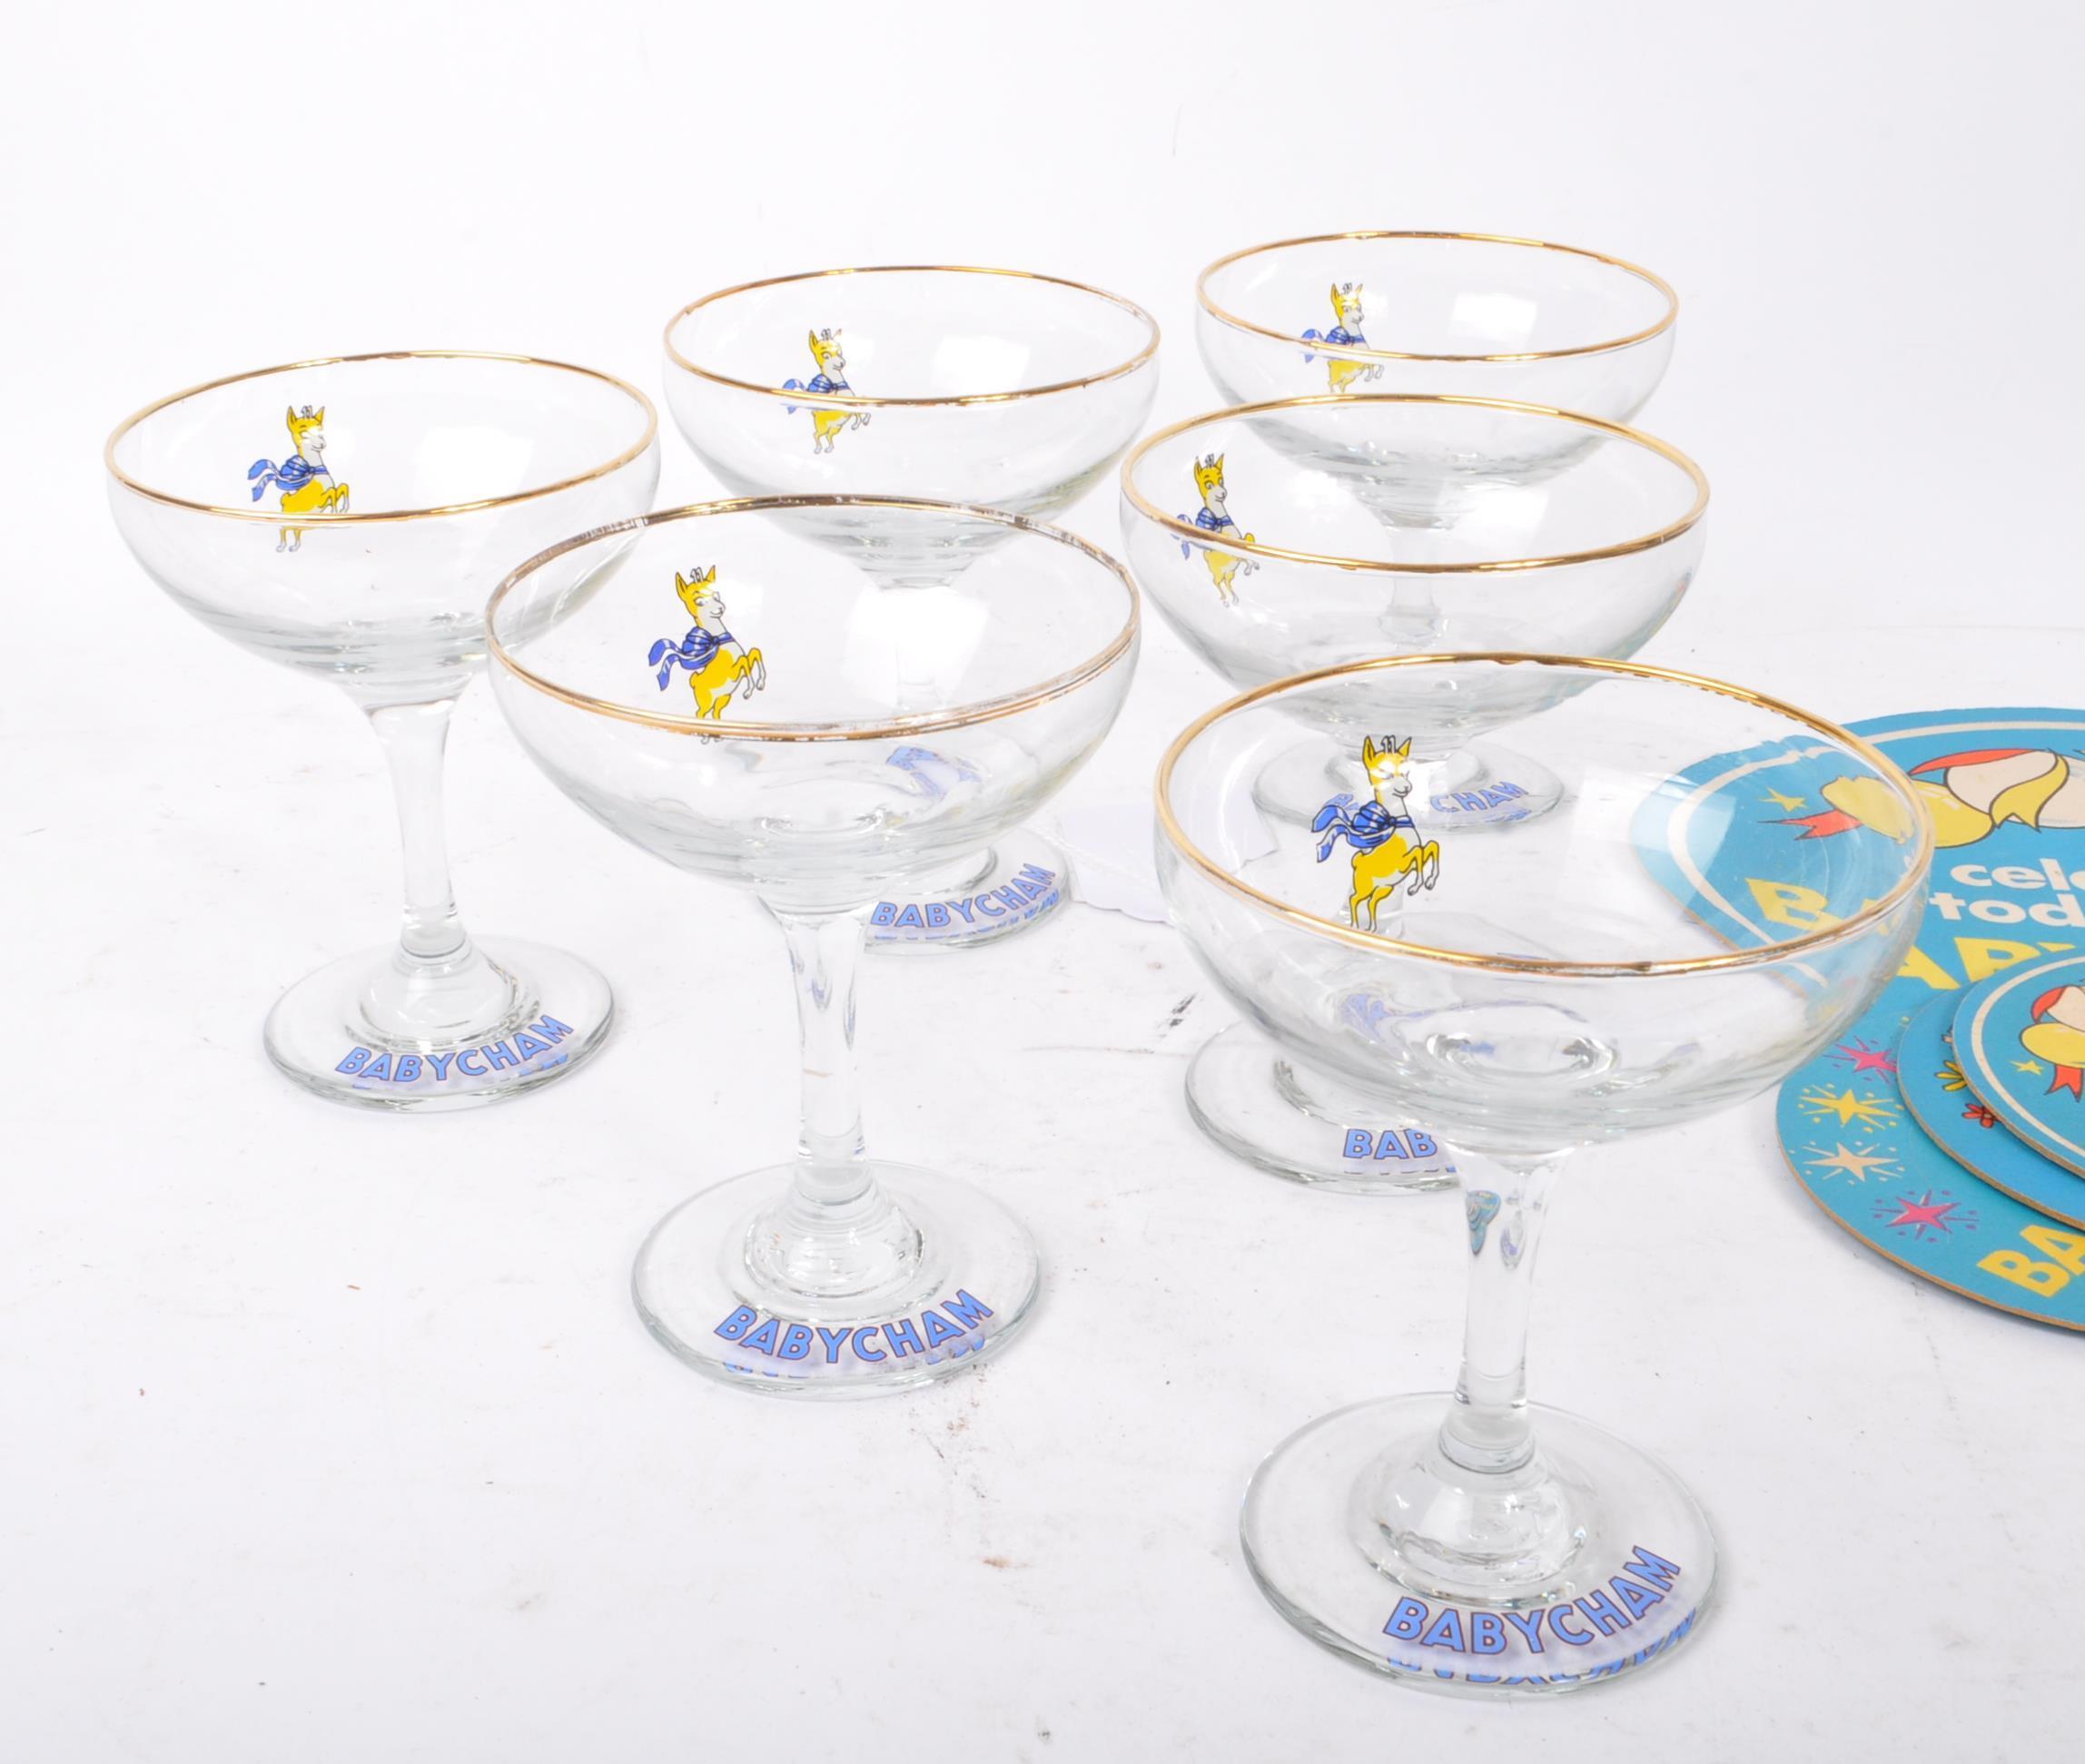 BABYCHAM - COLLECTION OF BRANDED DRINKING GLASSES - Image 2 of 7